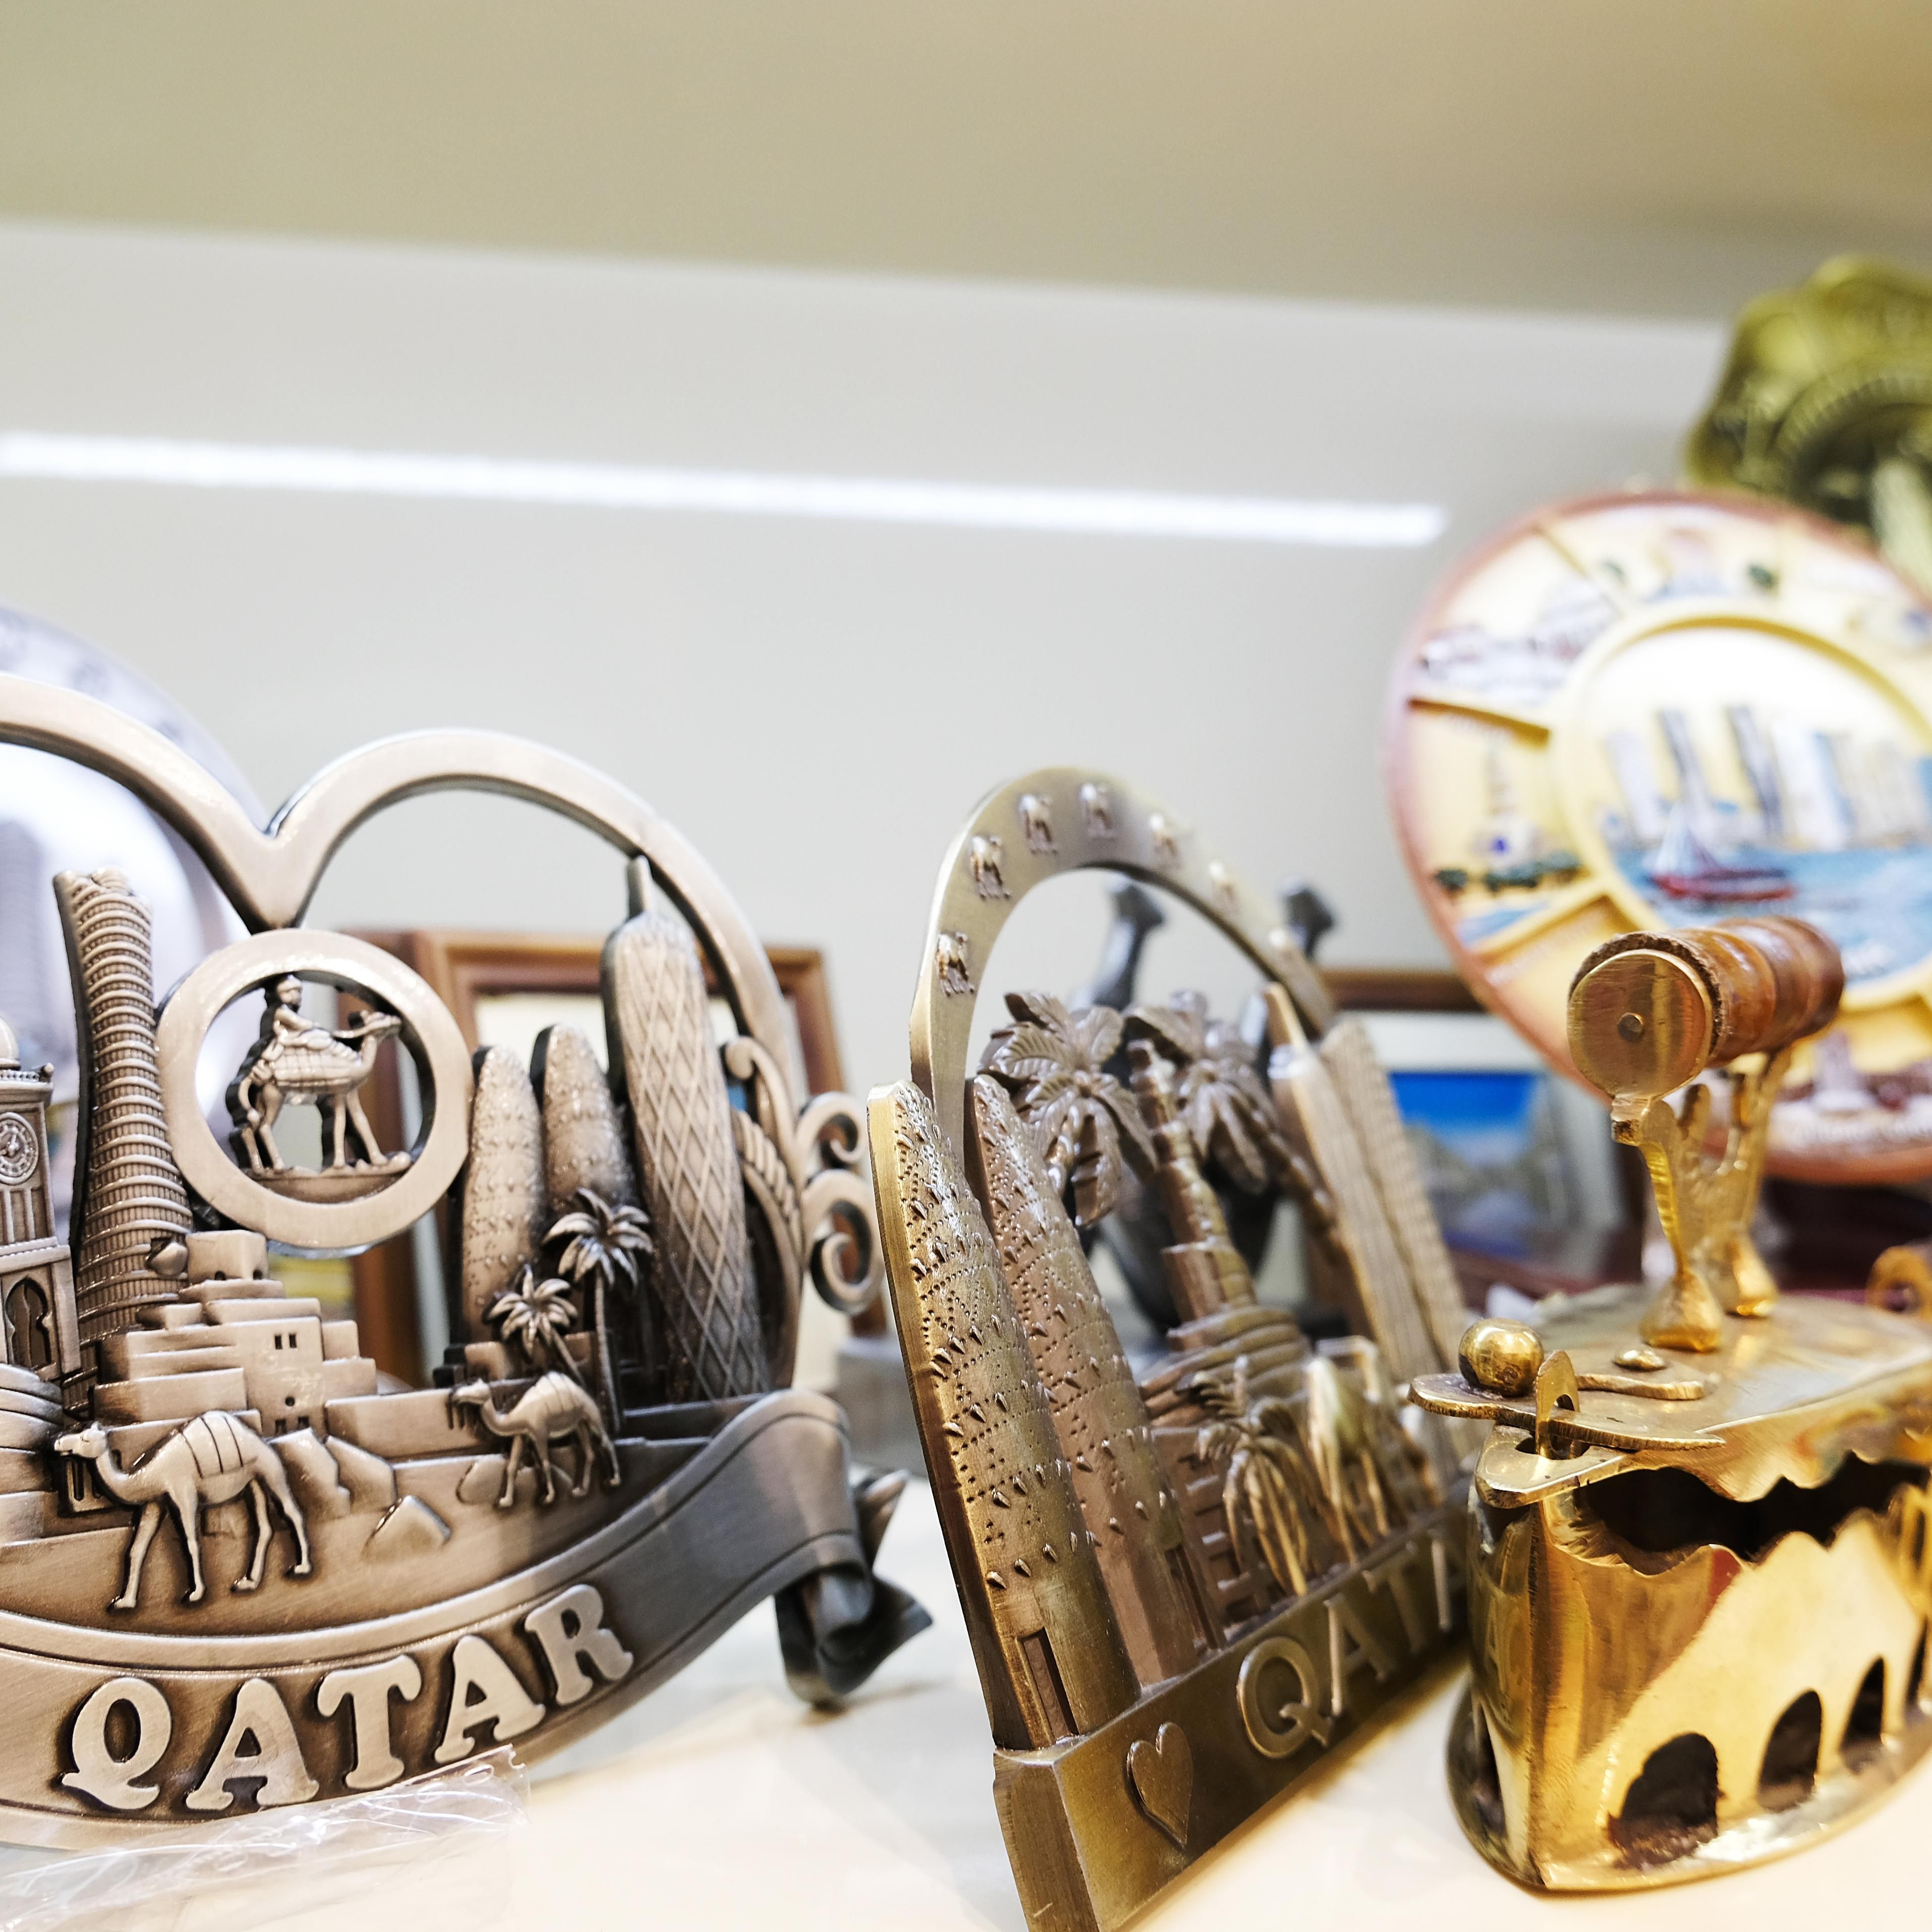 Qatar memorabilia available in our on-site gift shop